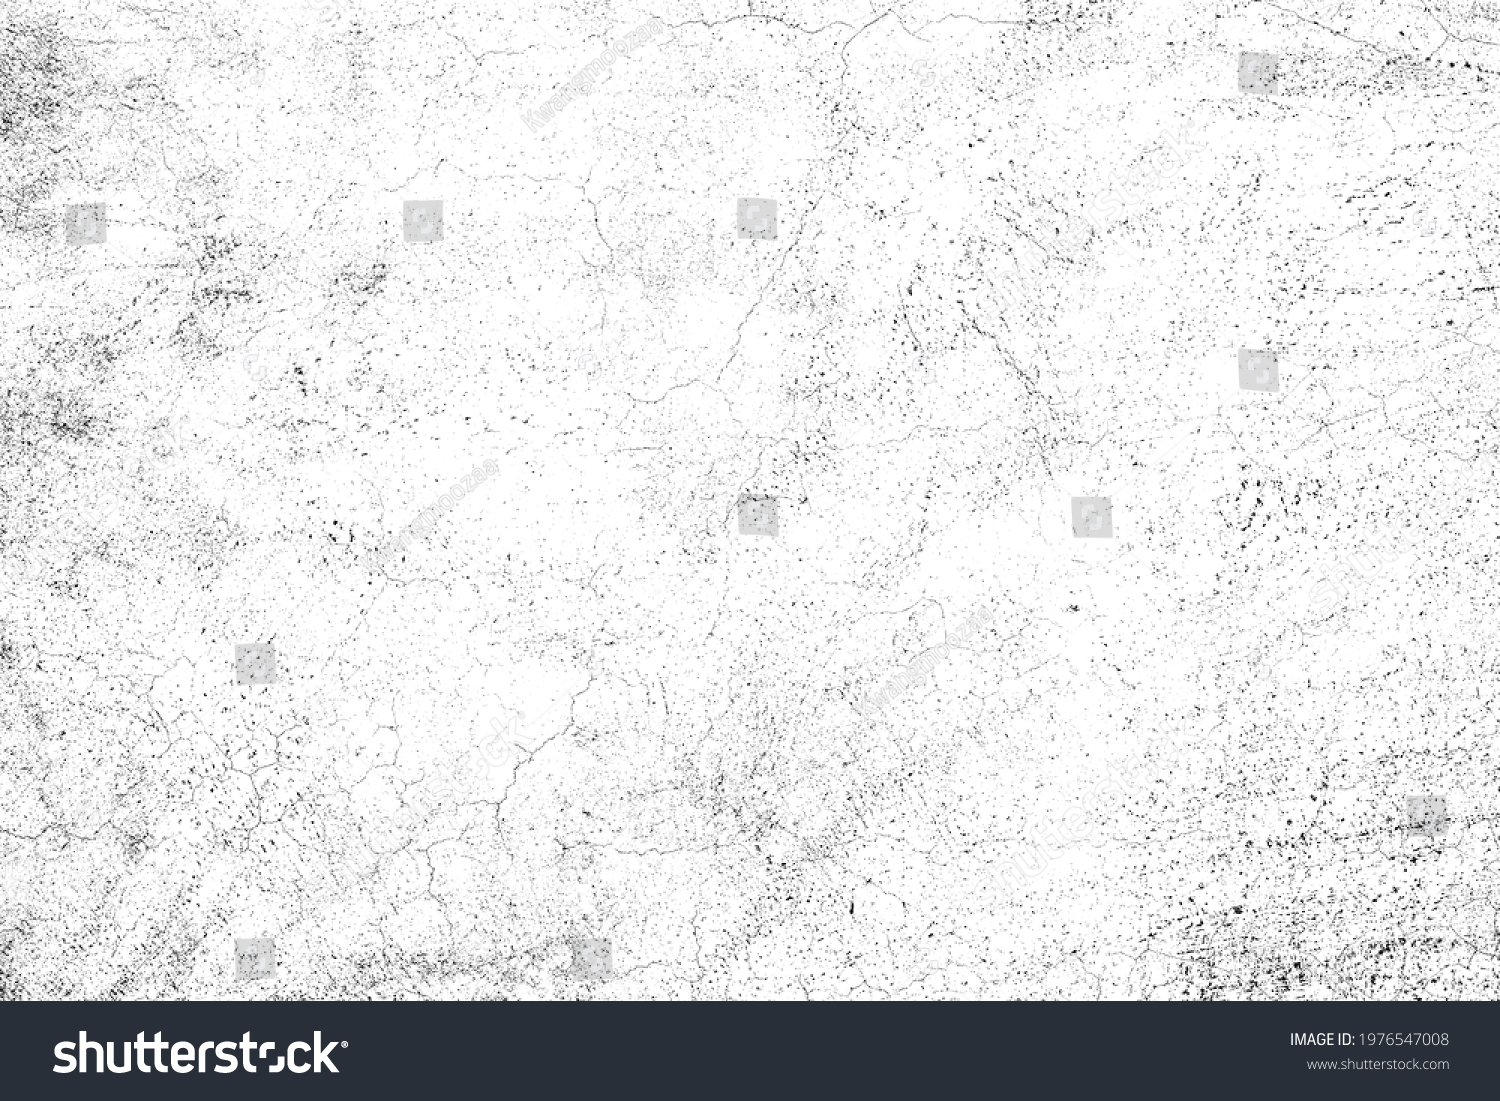 Abstract grunge concrete wall distressed texture background #1976547008